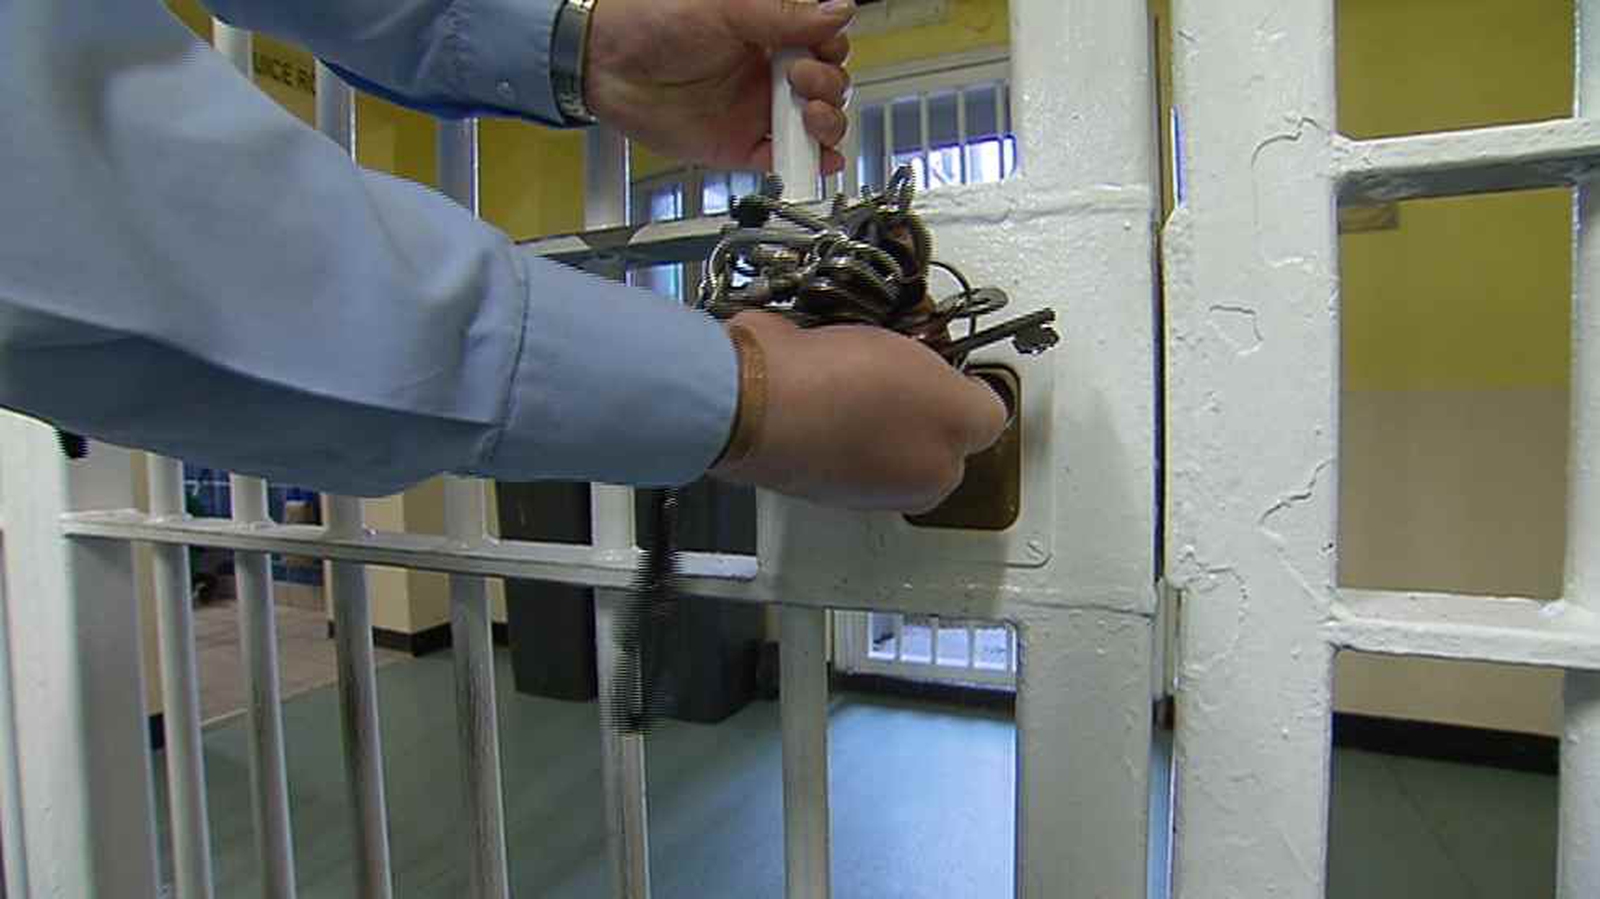 POA says cuts leading to rise in prison officer attacks - RTE.ie